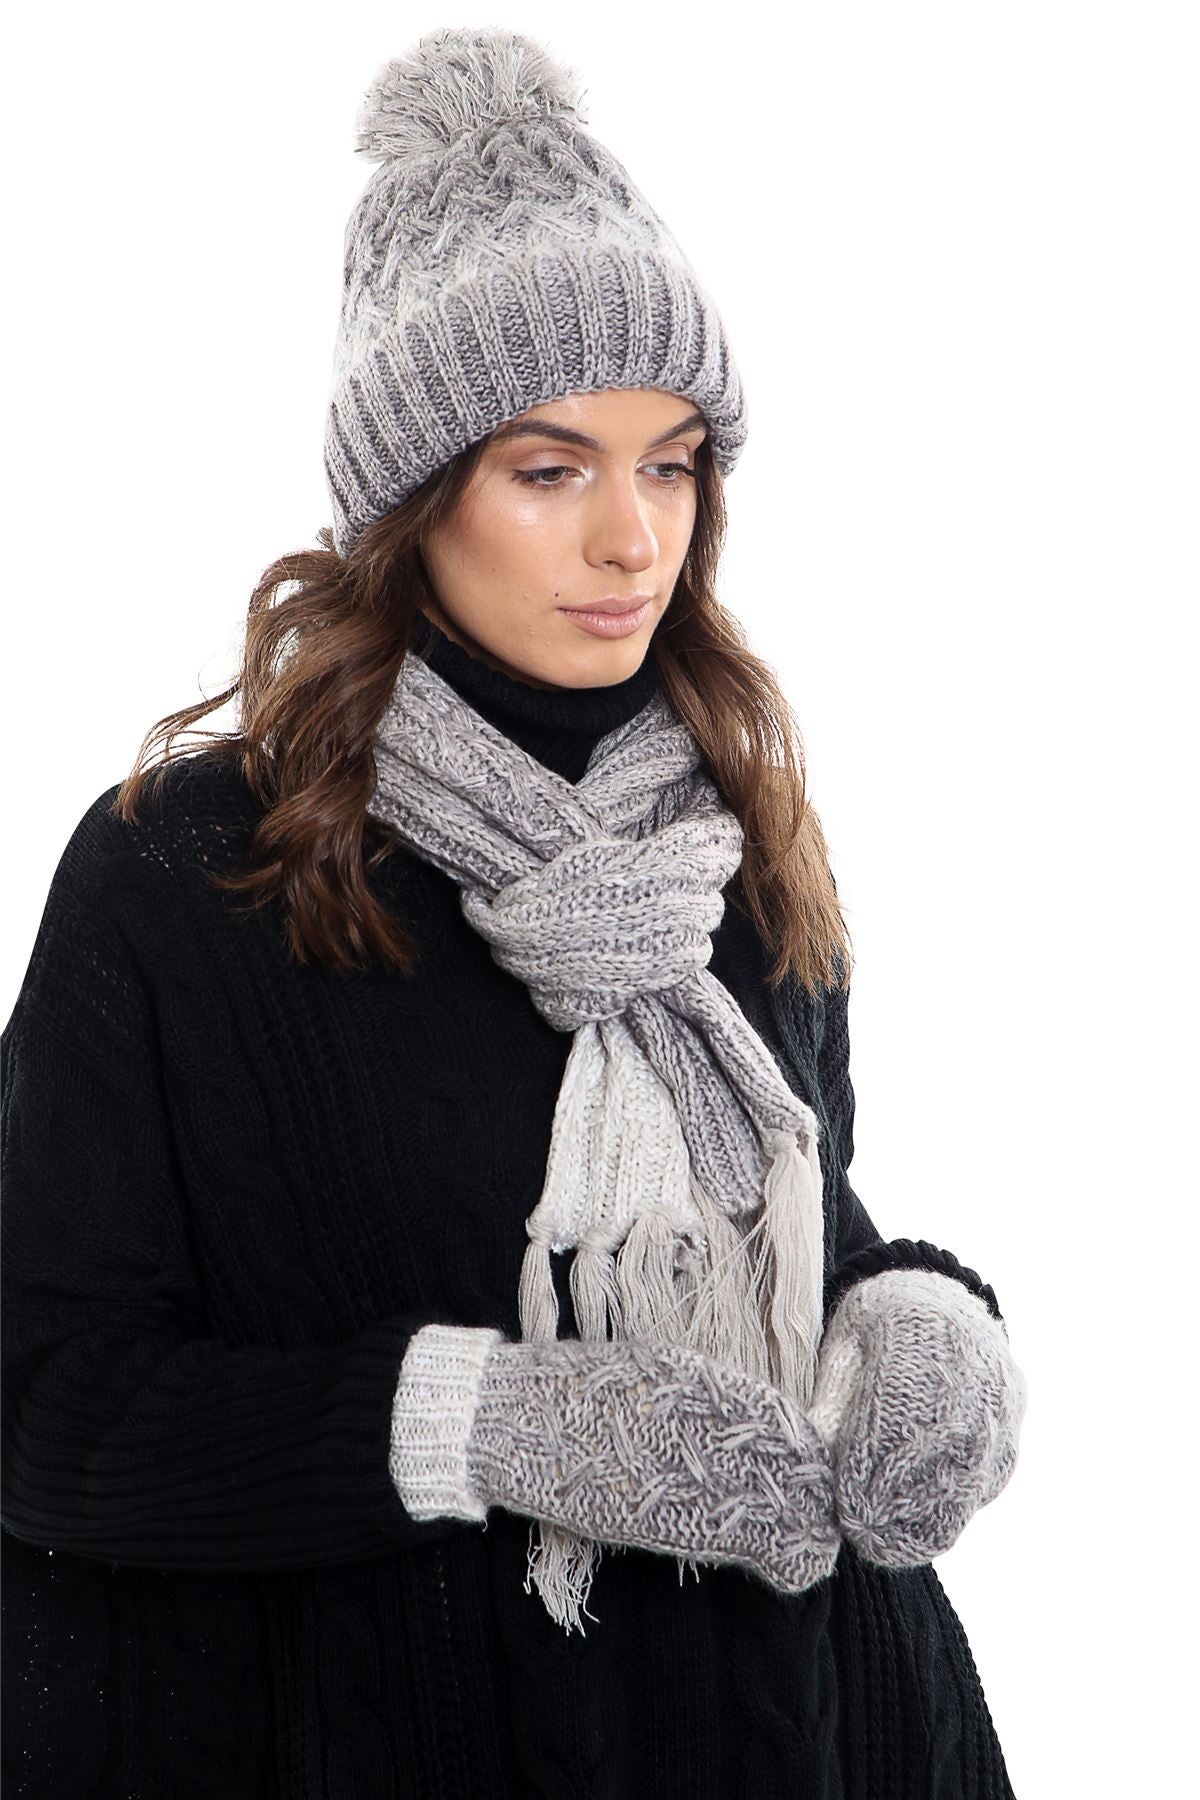 Womens LHTSF172 Wooly Thick knitted Hat, Scarf and Glove set -  Grey & White